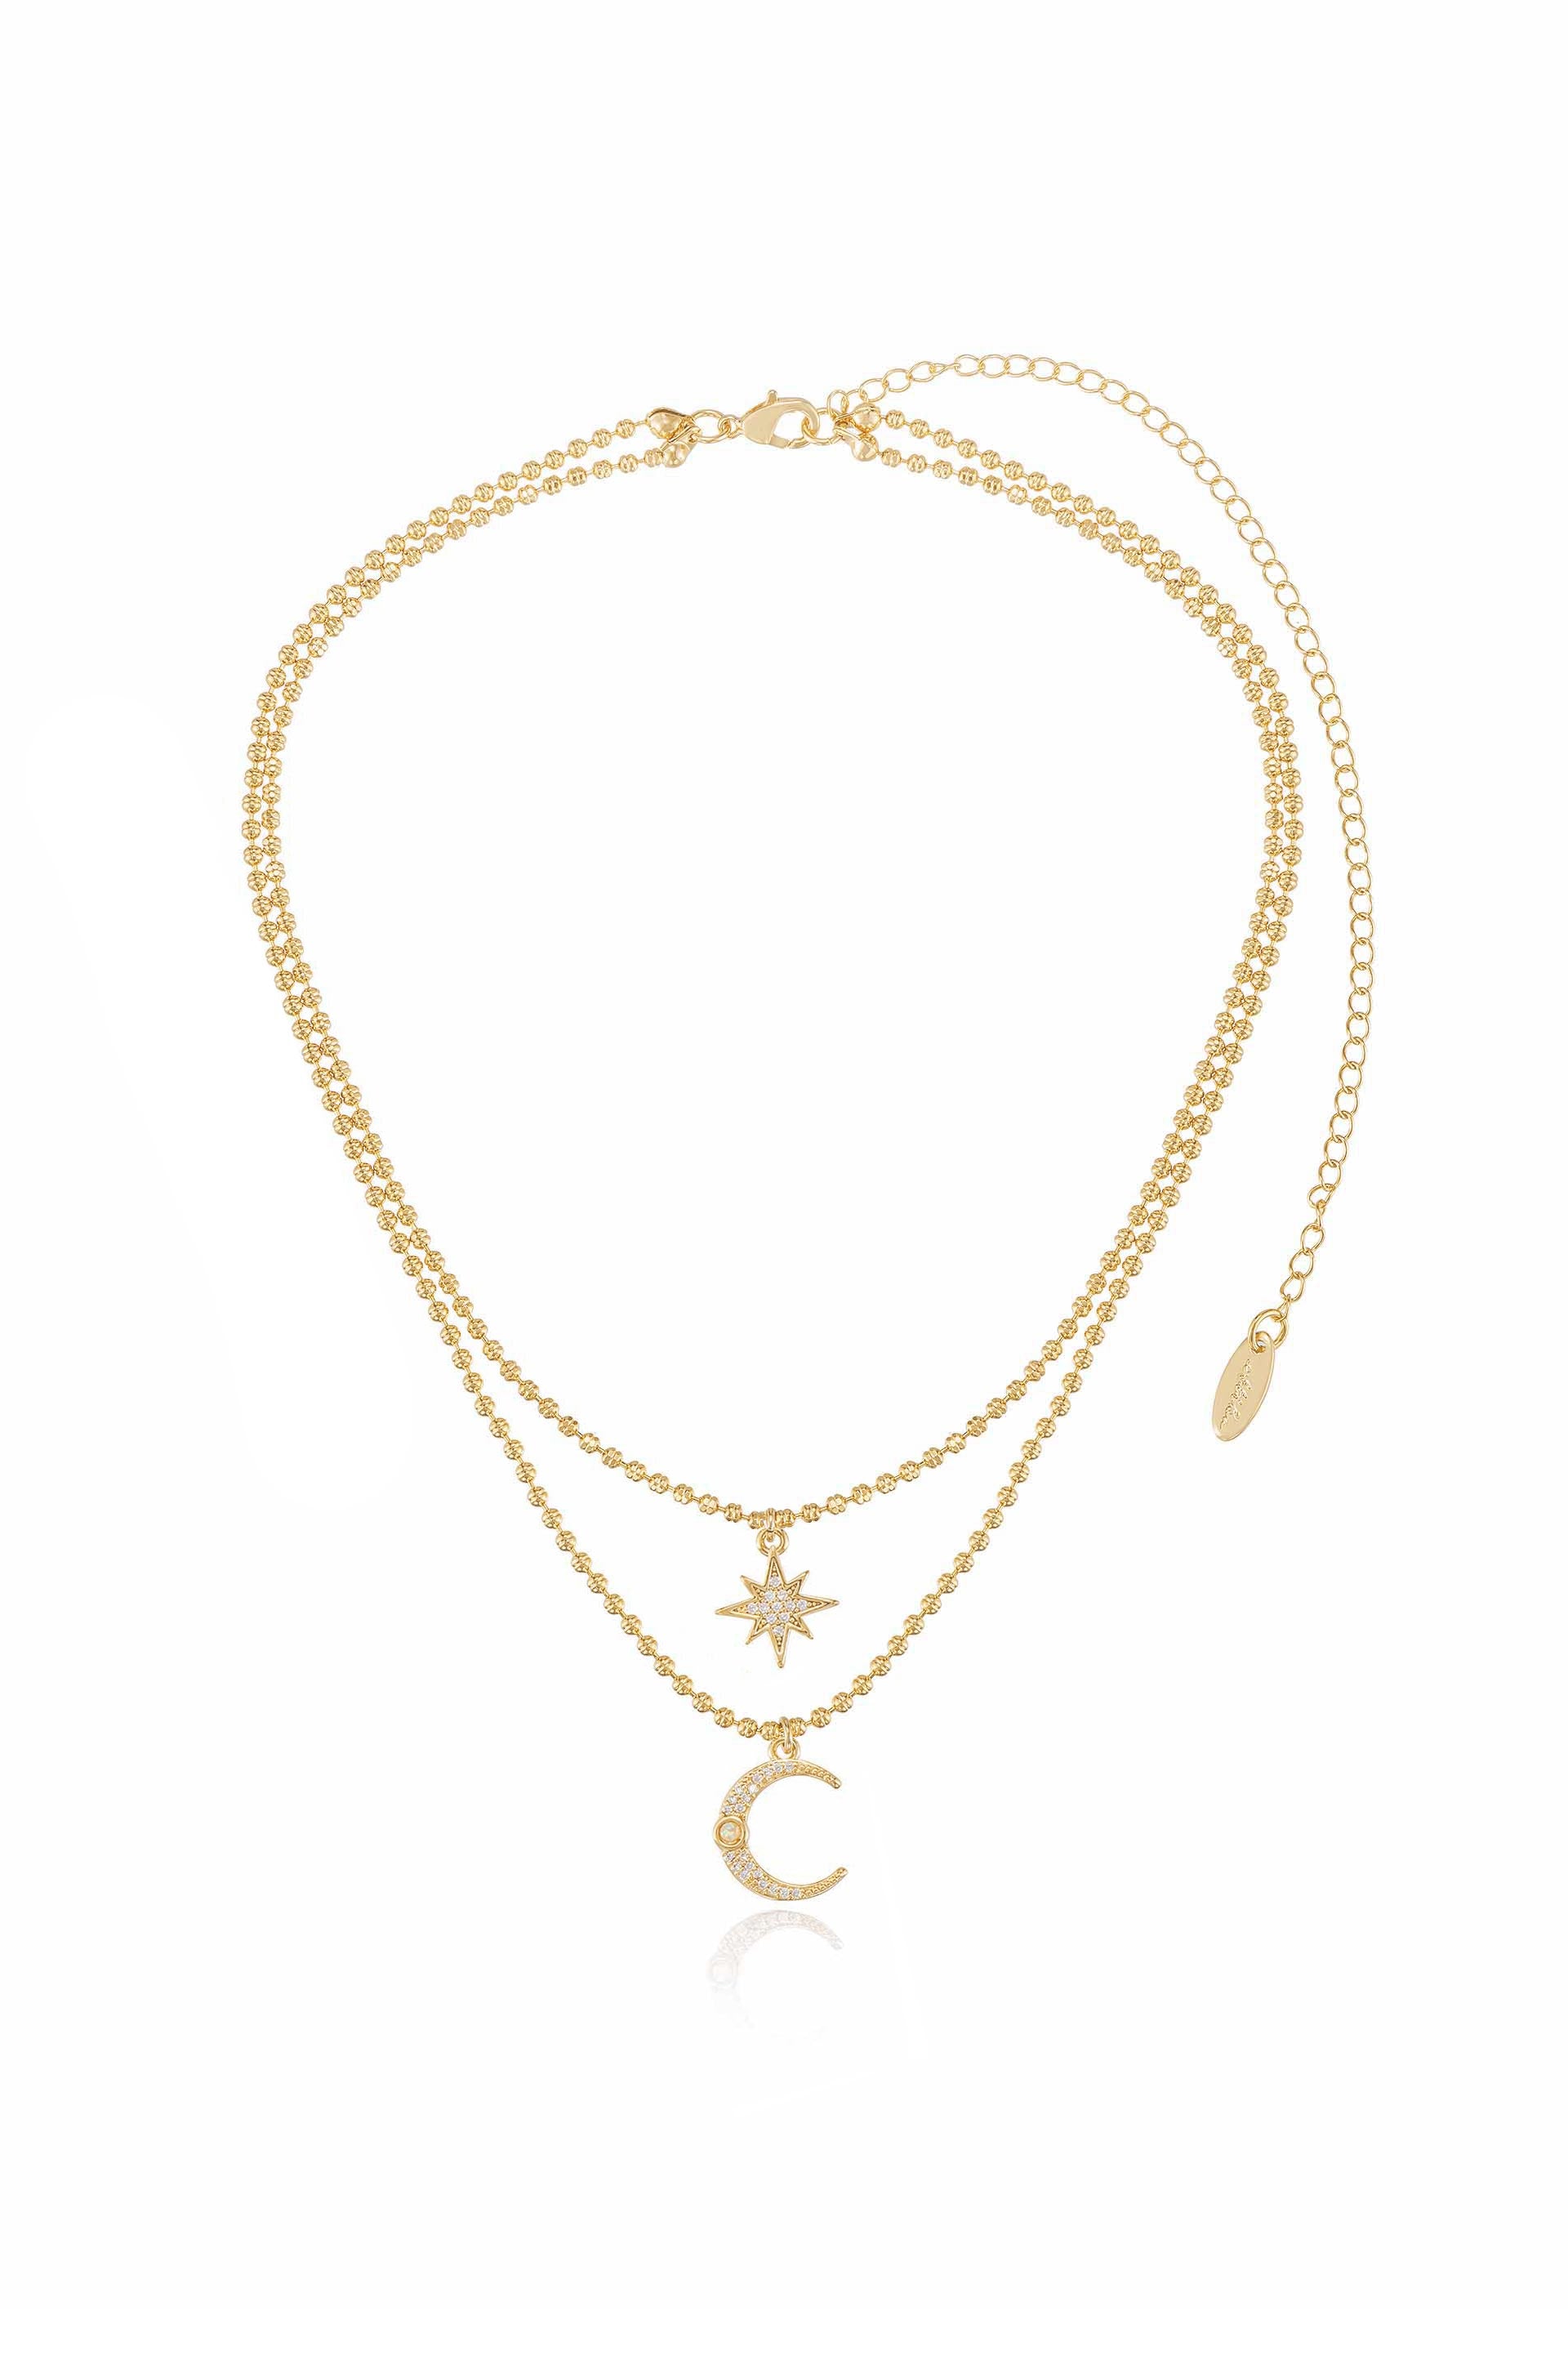 Celestial Moon and Star 18k Gold Plated Layered Necklace full